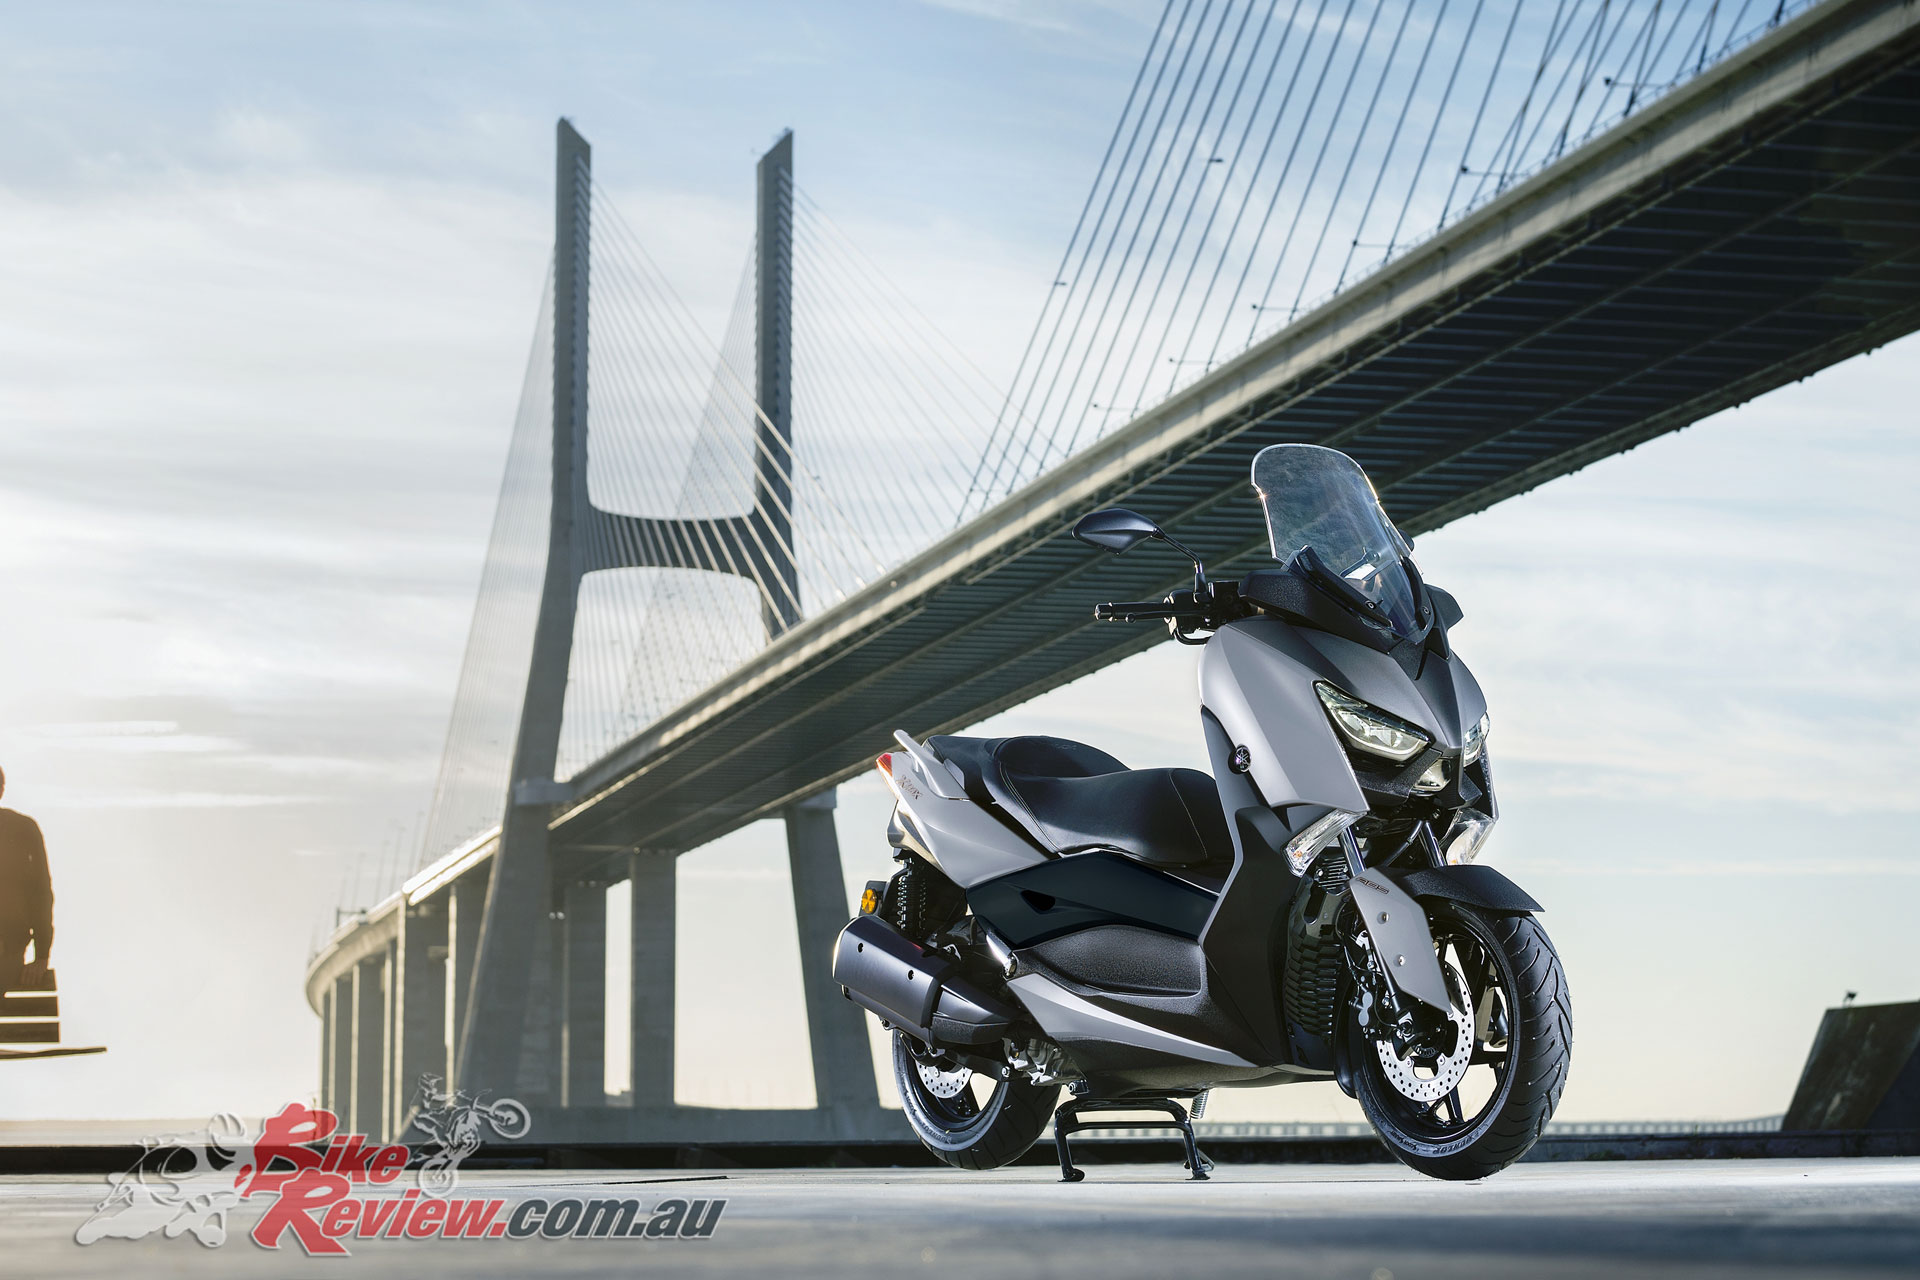 The Yamaha XMAX 300 offers a high spec mid-capacity scooter option with the versatility to commute and handle weekend tours